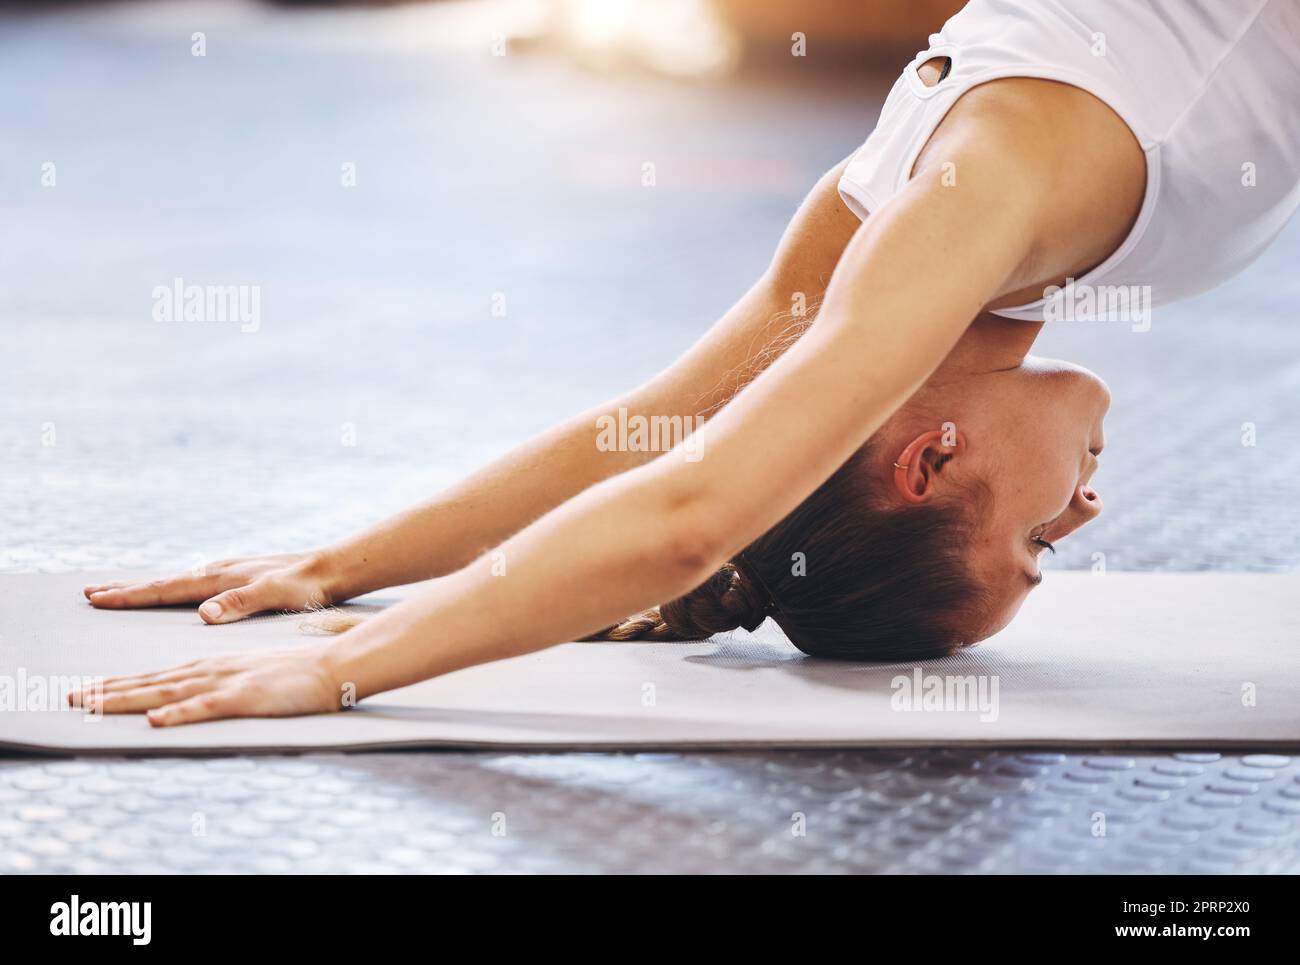 Yoga, balance and wellness with active fitness woman for health at gym or an exercise or pilates class. Training, workout and downward facing dog pose while exercising for a healthy and fit body Stock Photo